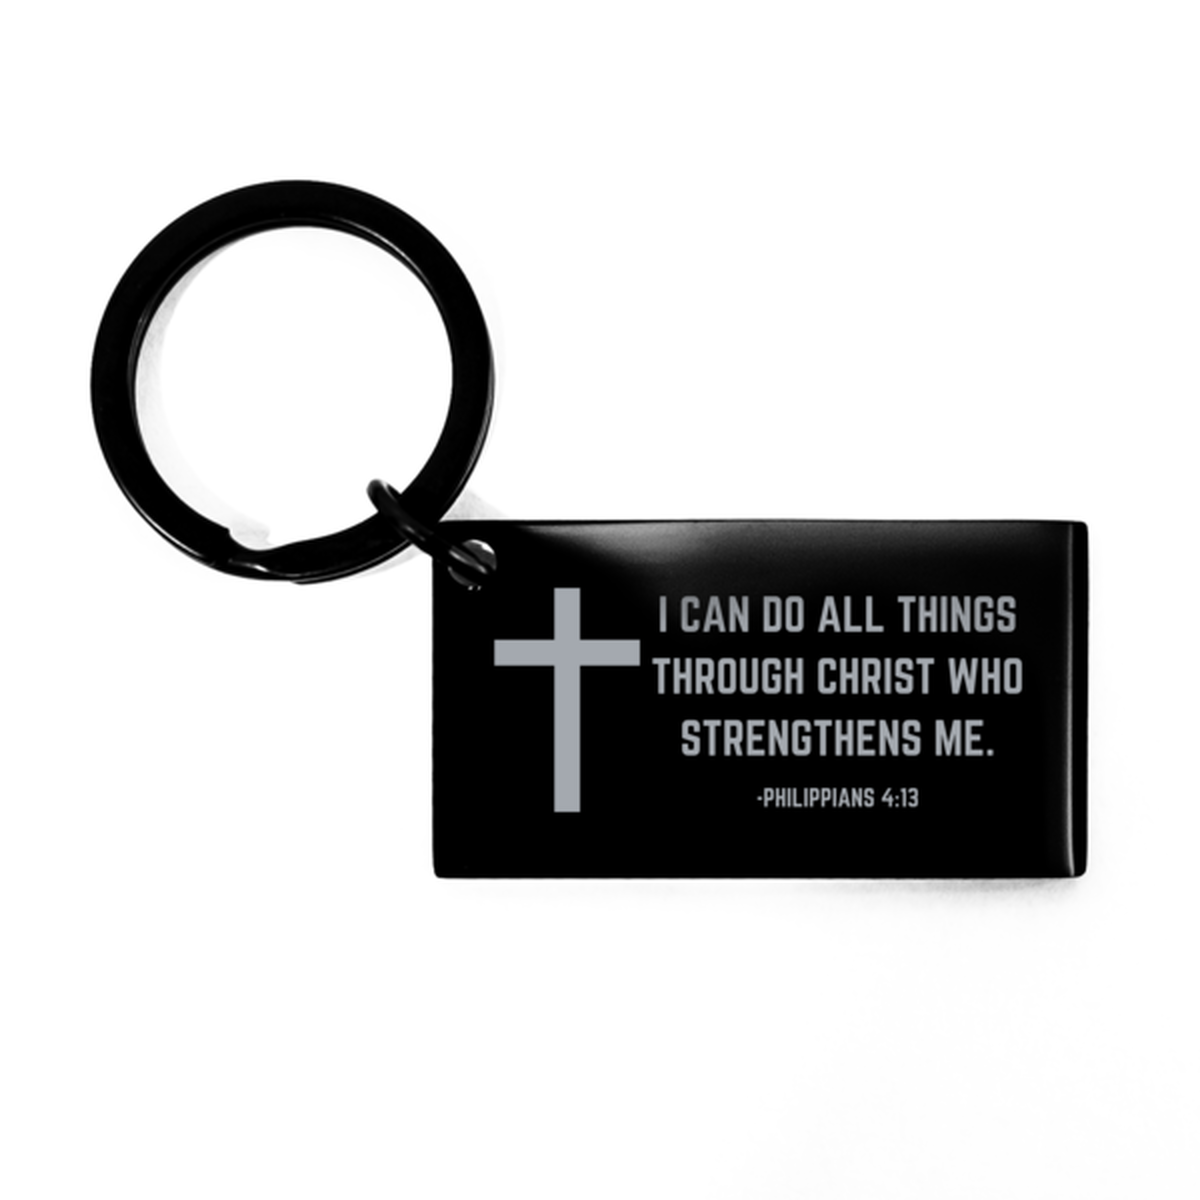 Baptism Gifts For Teenage Boys Girls, Christian Bible Verse Black Keychain, I can do all things through Christ, Confirmation Gifts, Bible Verse Keyring for Son, Godson, Grandson, Nephew